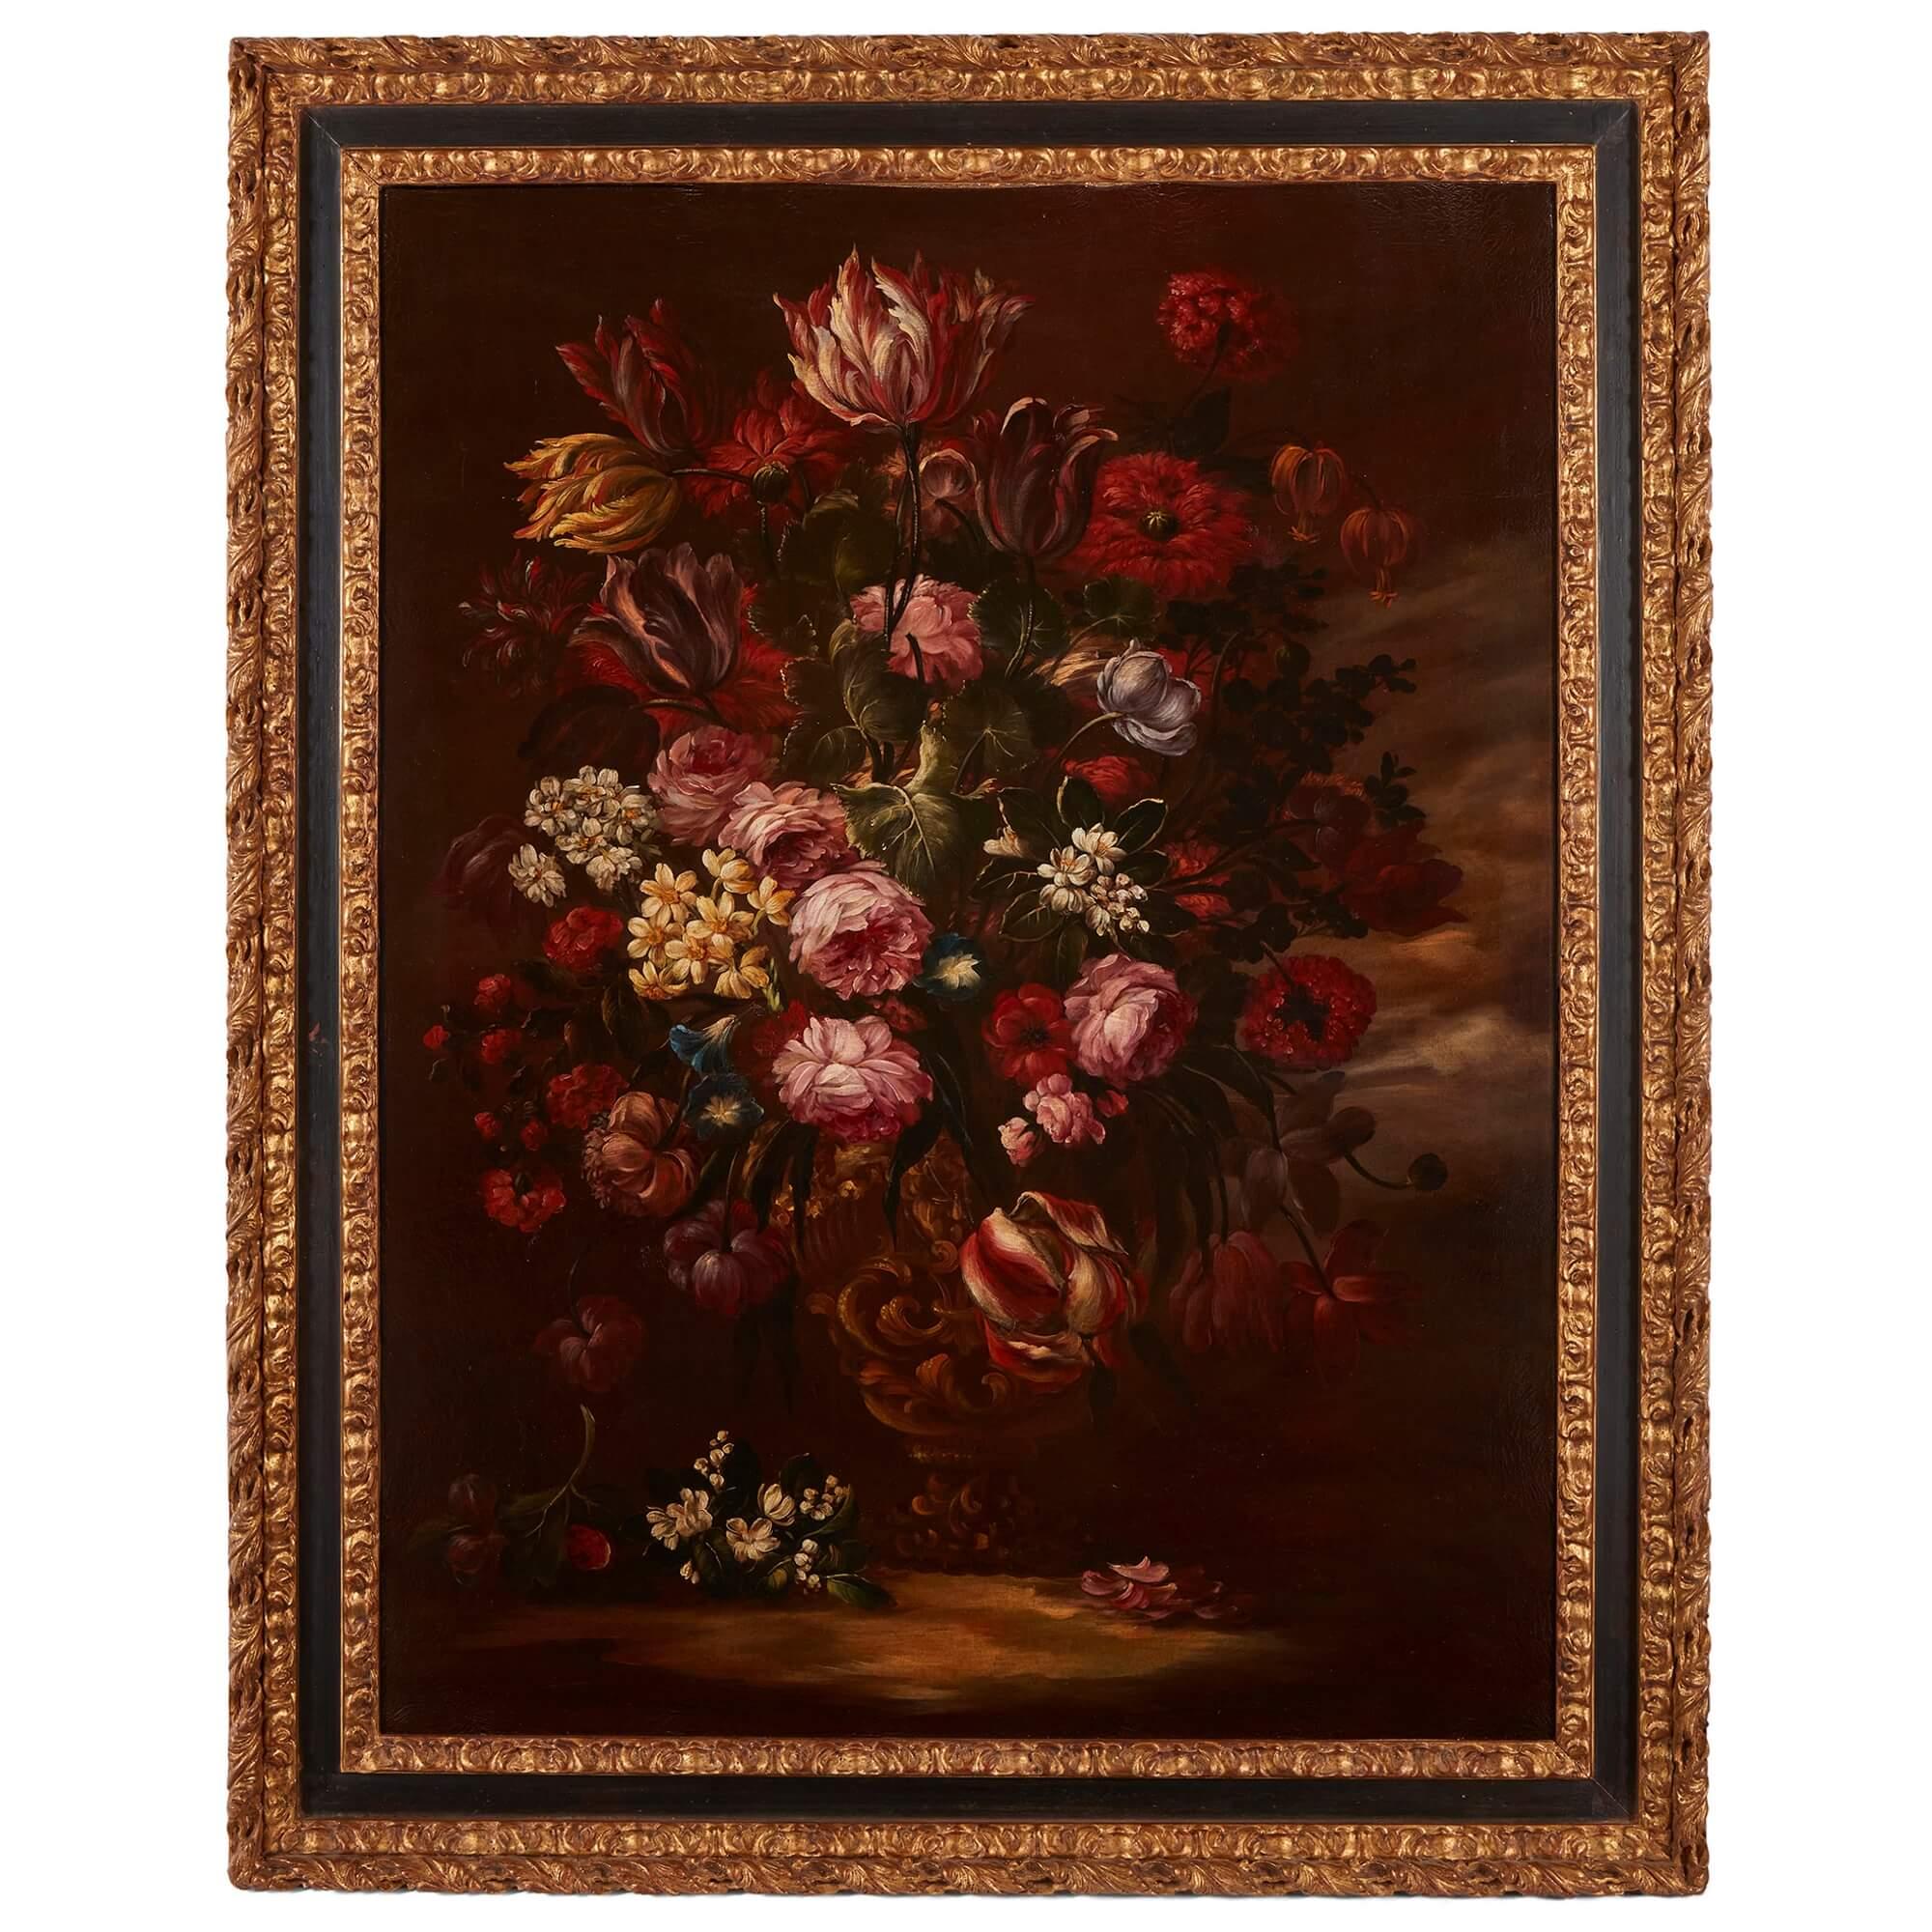 Pair of Large Floral Still Lifes in the Old Master Style  - Old Masters Painting by Unknown